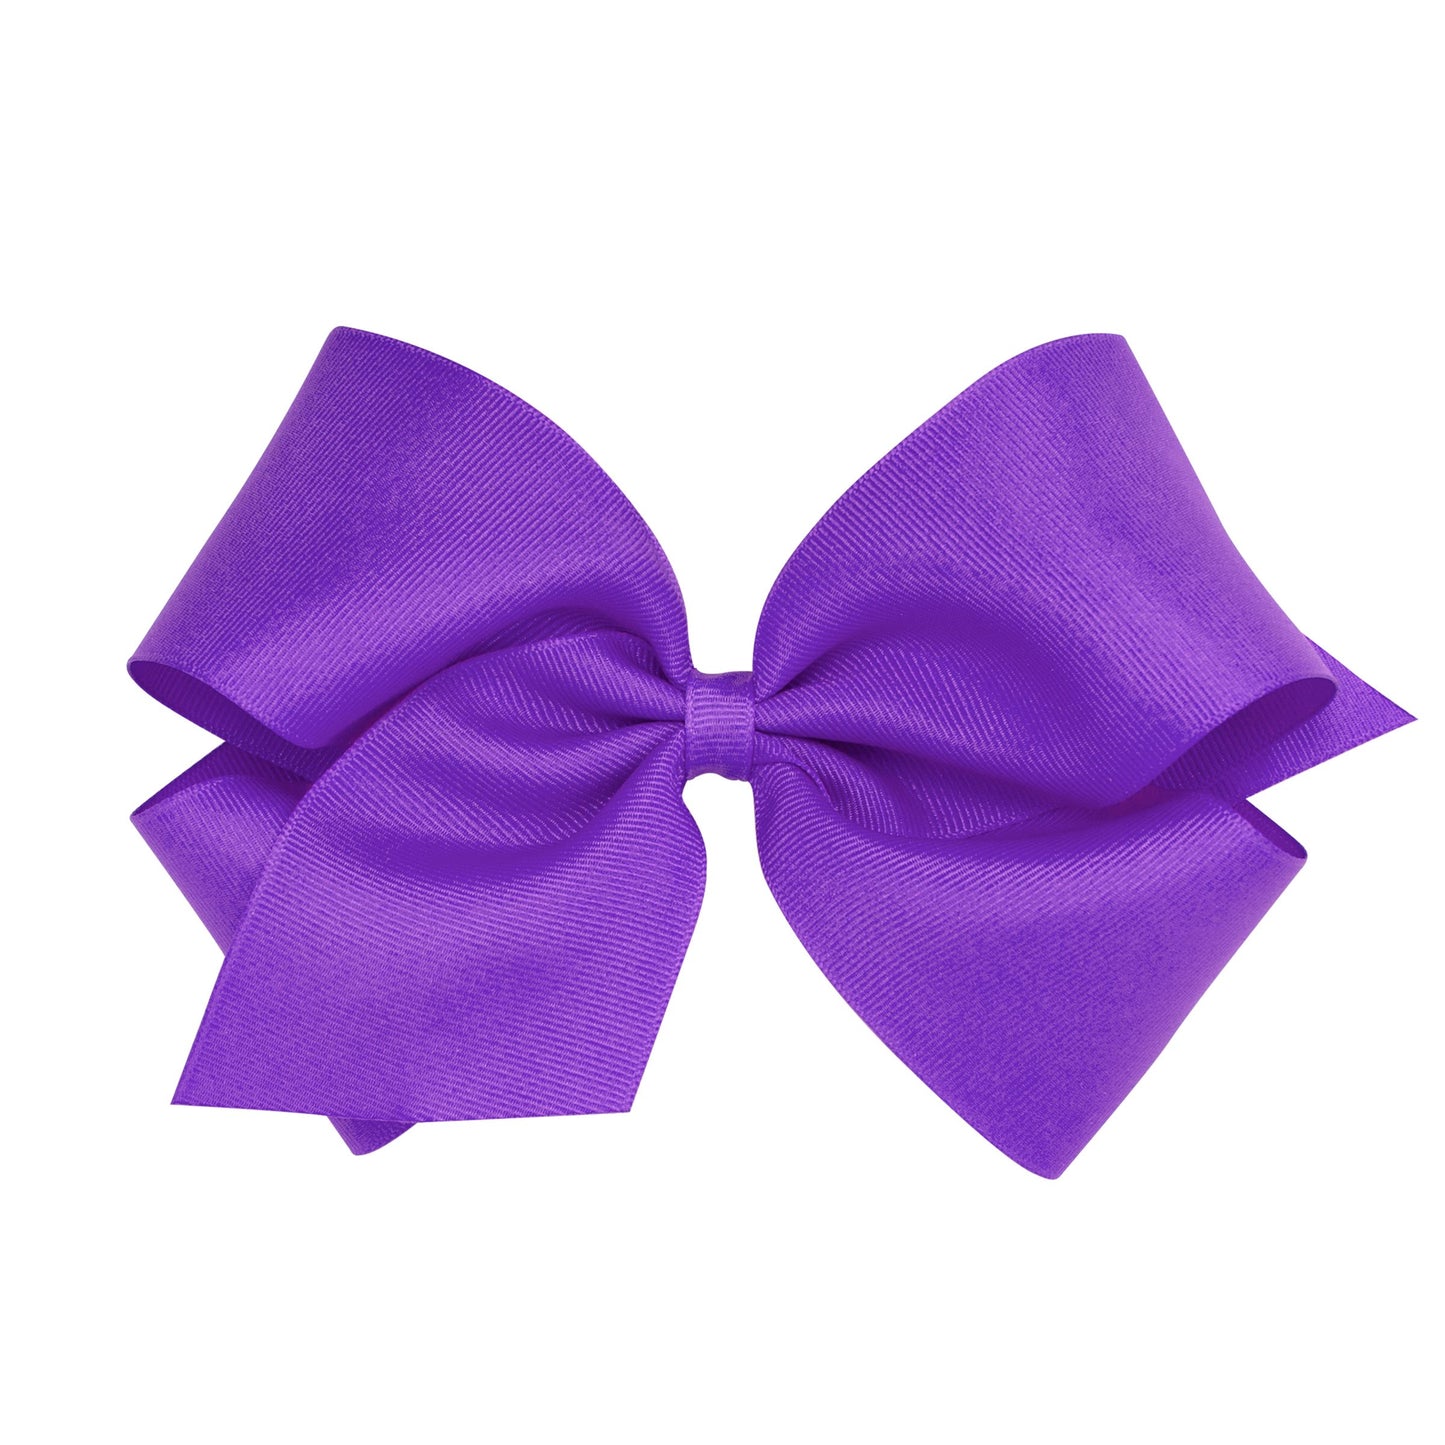 KING Grosgrain Basic Bow with Knot Wrap-MULTI COLOR (6 1/4" x 5")